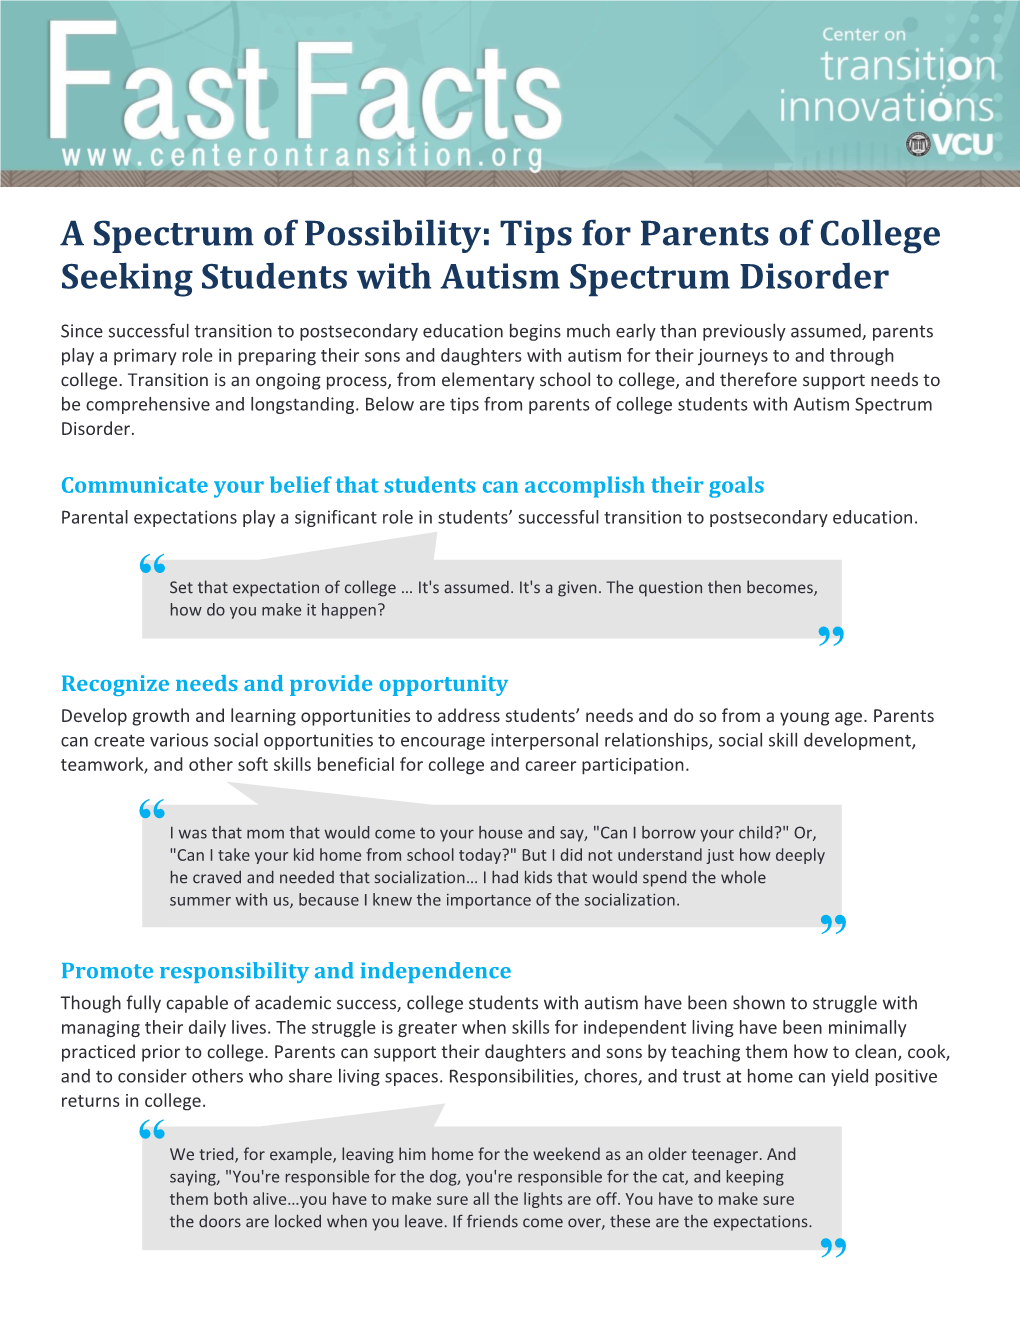 Tips for Parents of College Seeking Students with Autism Spectrum Disorder